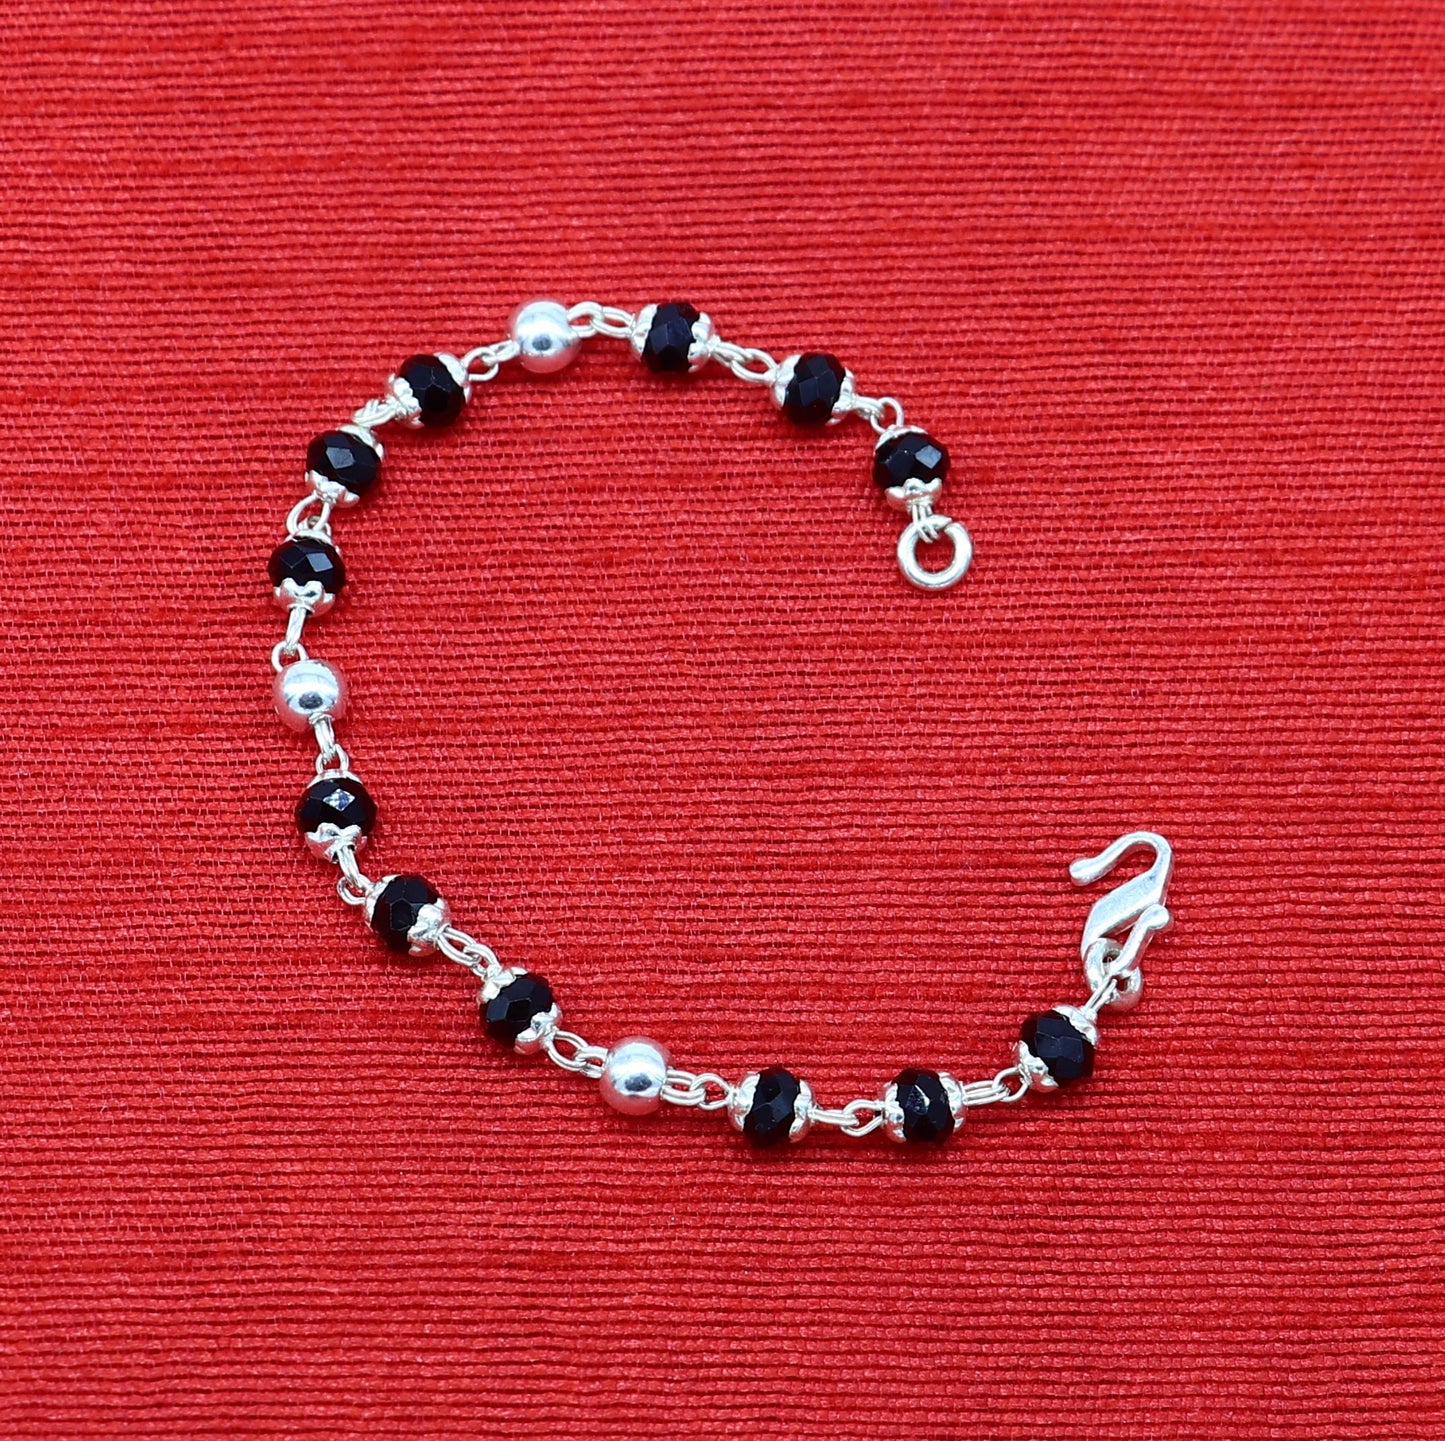 4.5" inches long handmade sterling silver beaded bracelet or necklace for baby krishna figurine or sculpture, best puja necklace sbr226 - TRIBAL ORNAMENTS